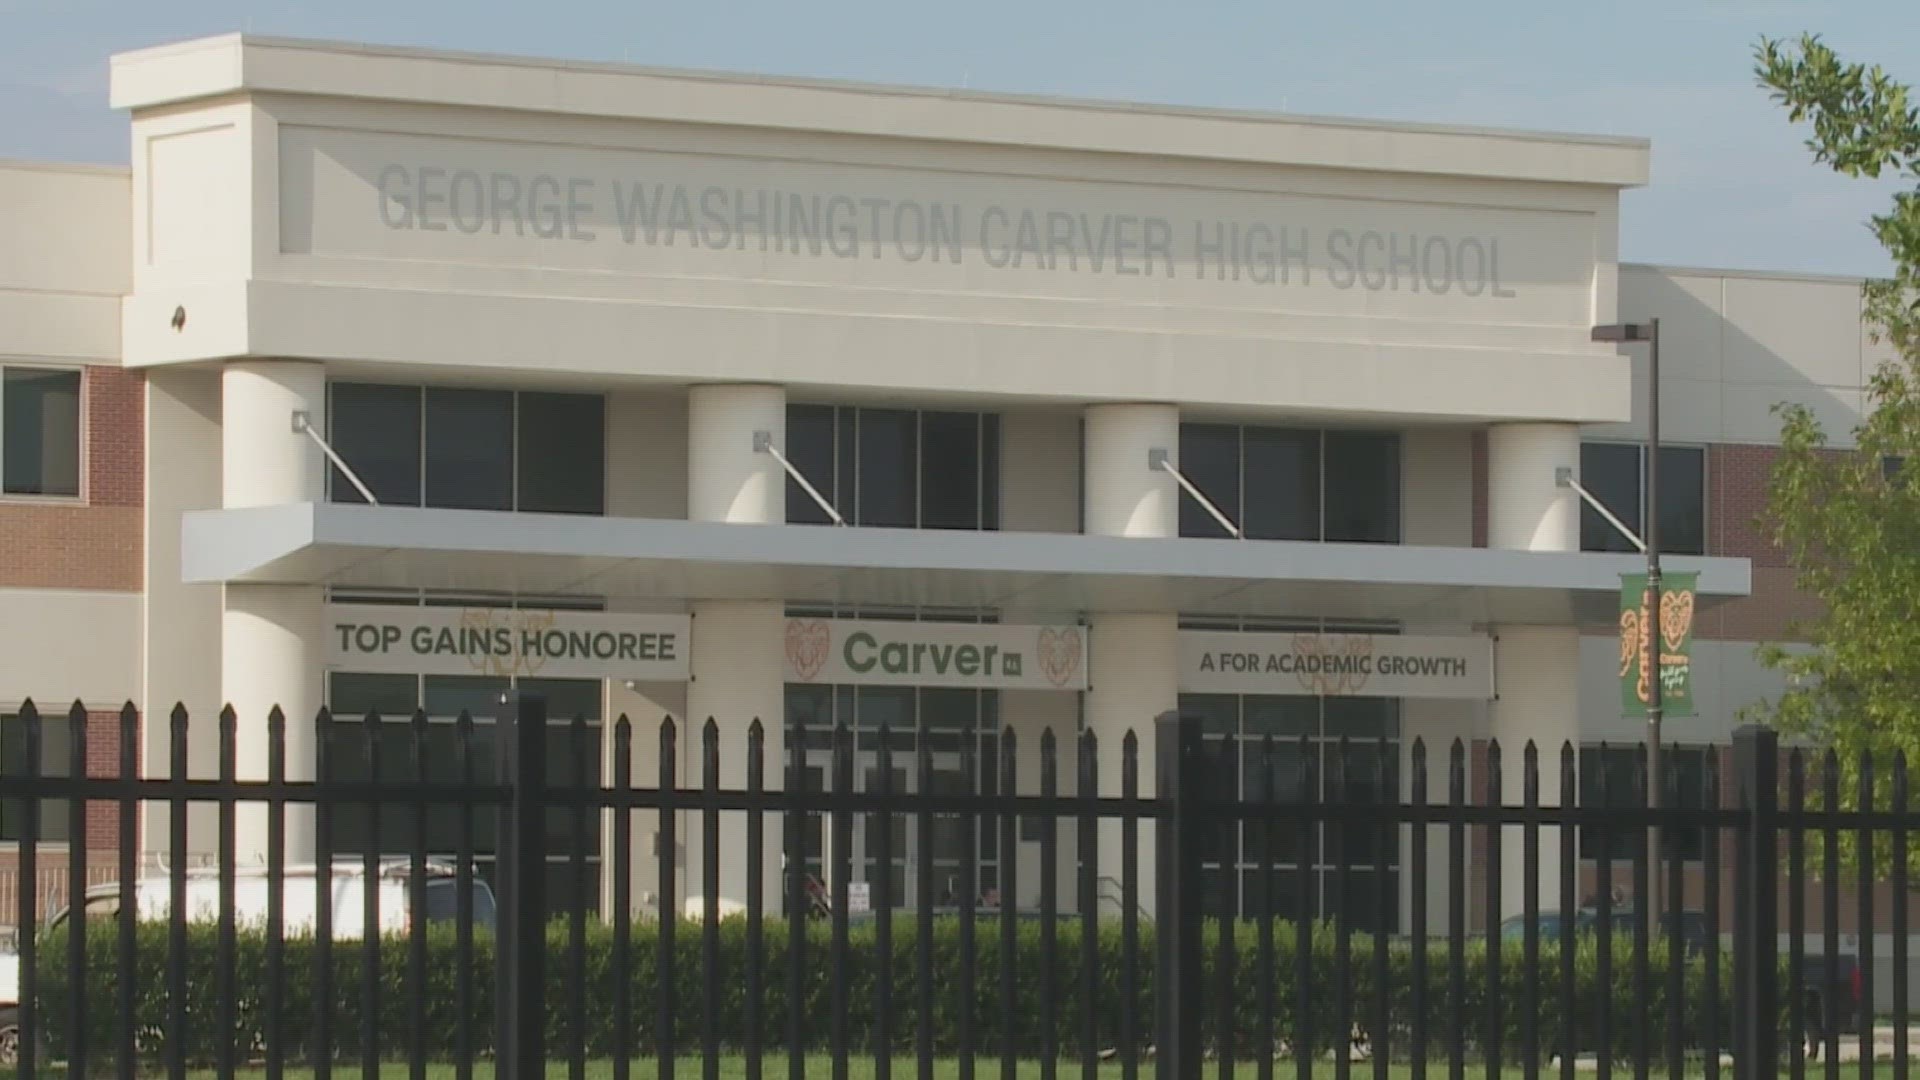 Local high school football coach is on leave pending an investigation at George Washington Carver after he is accused of getting physical with a player this month.